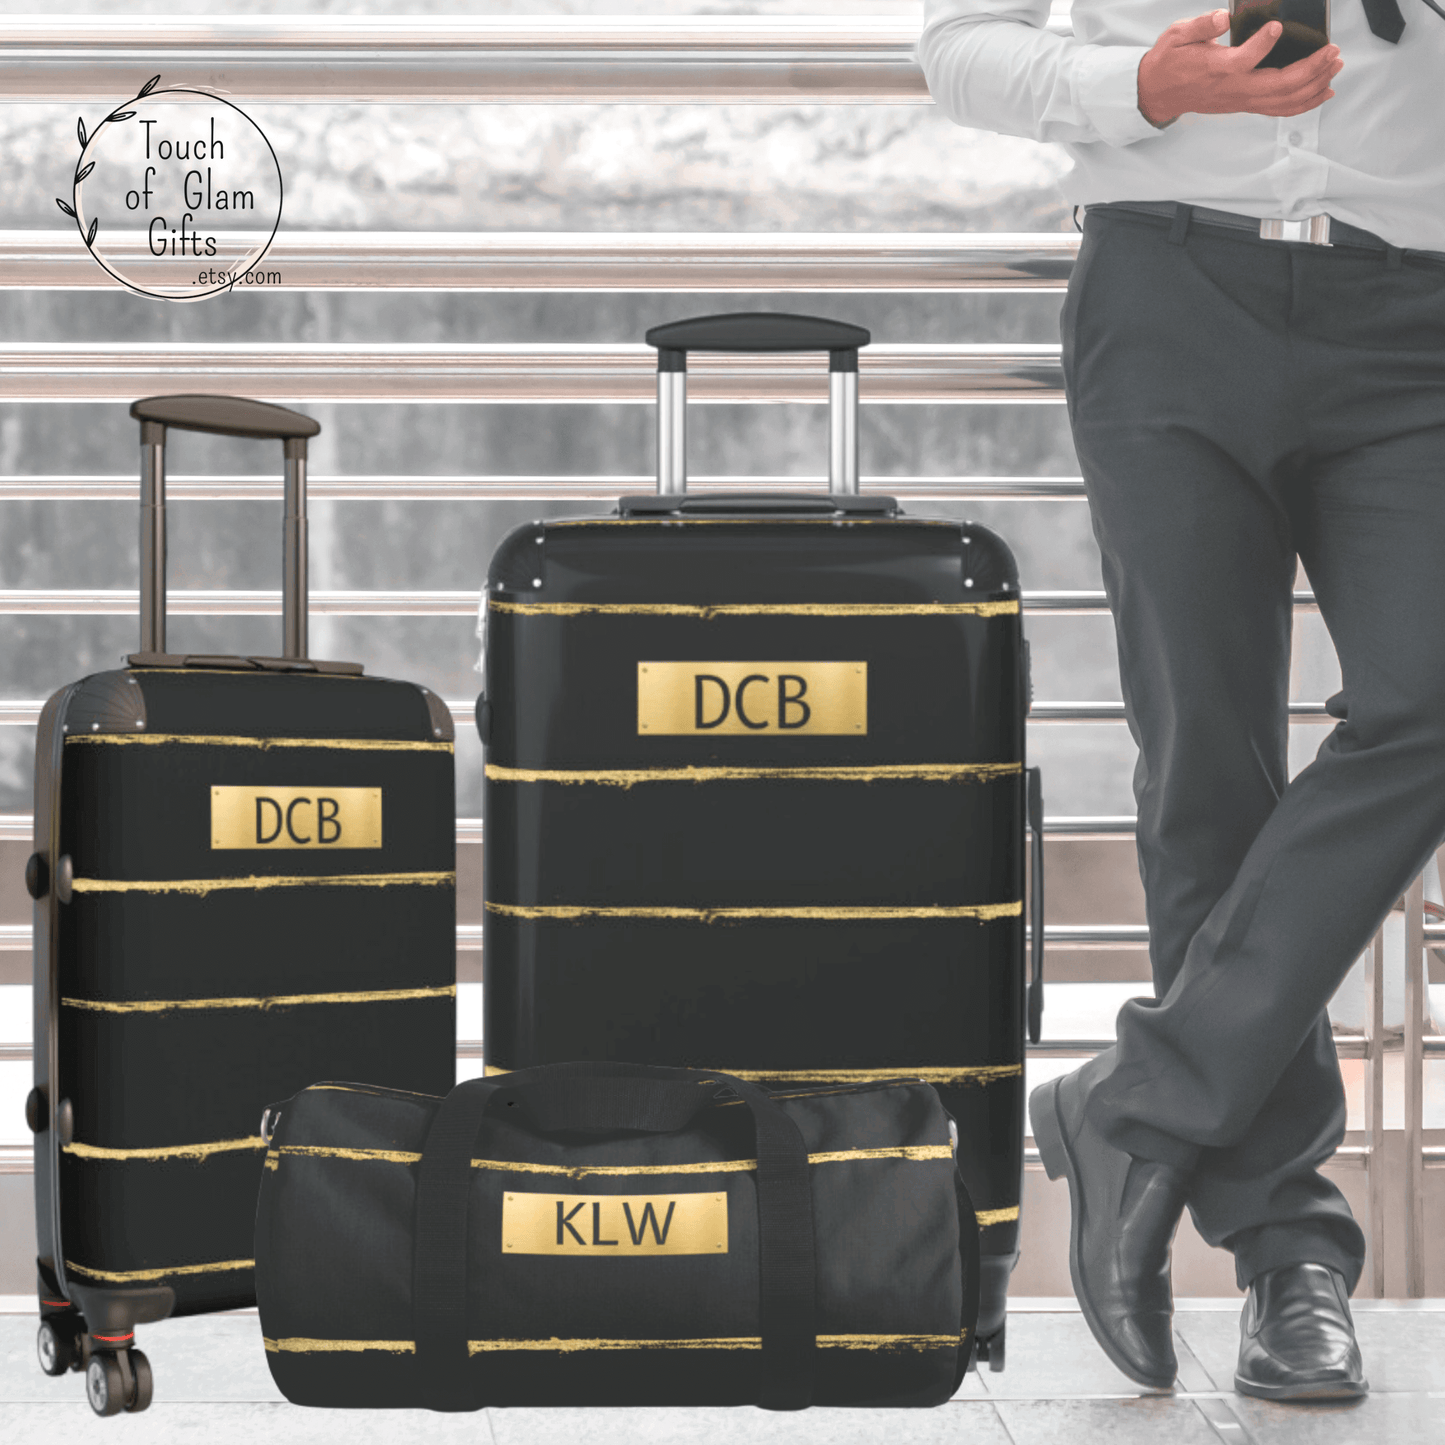 Our black and gold duffel bag matches our line of hard shell luggage with wheels. The line of travel gear can be monogrammed and personalized for the perfect gift. This picture shows two suitcases and a duffel bag, all matching.